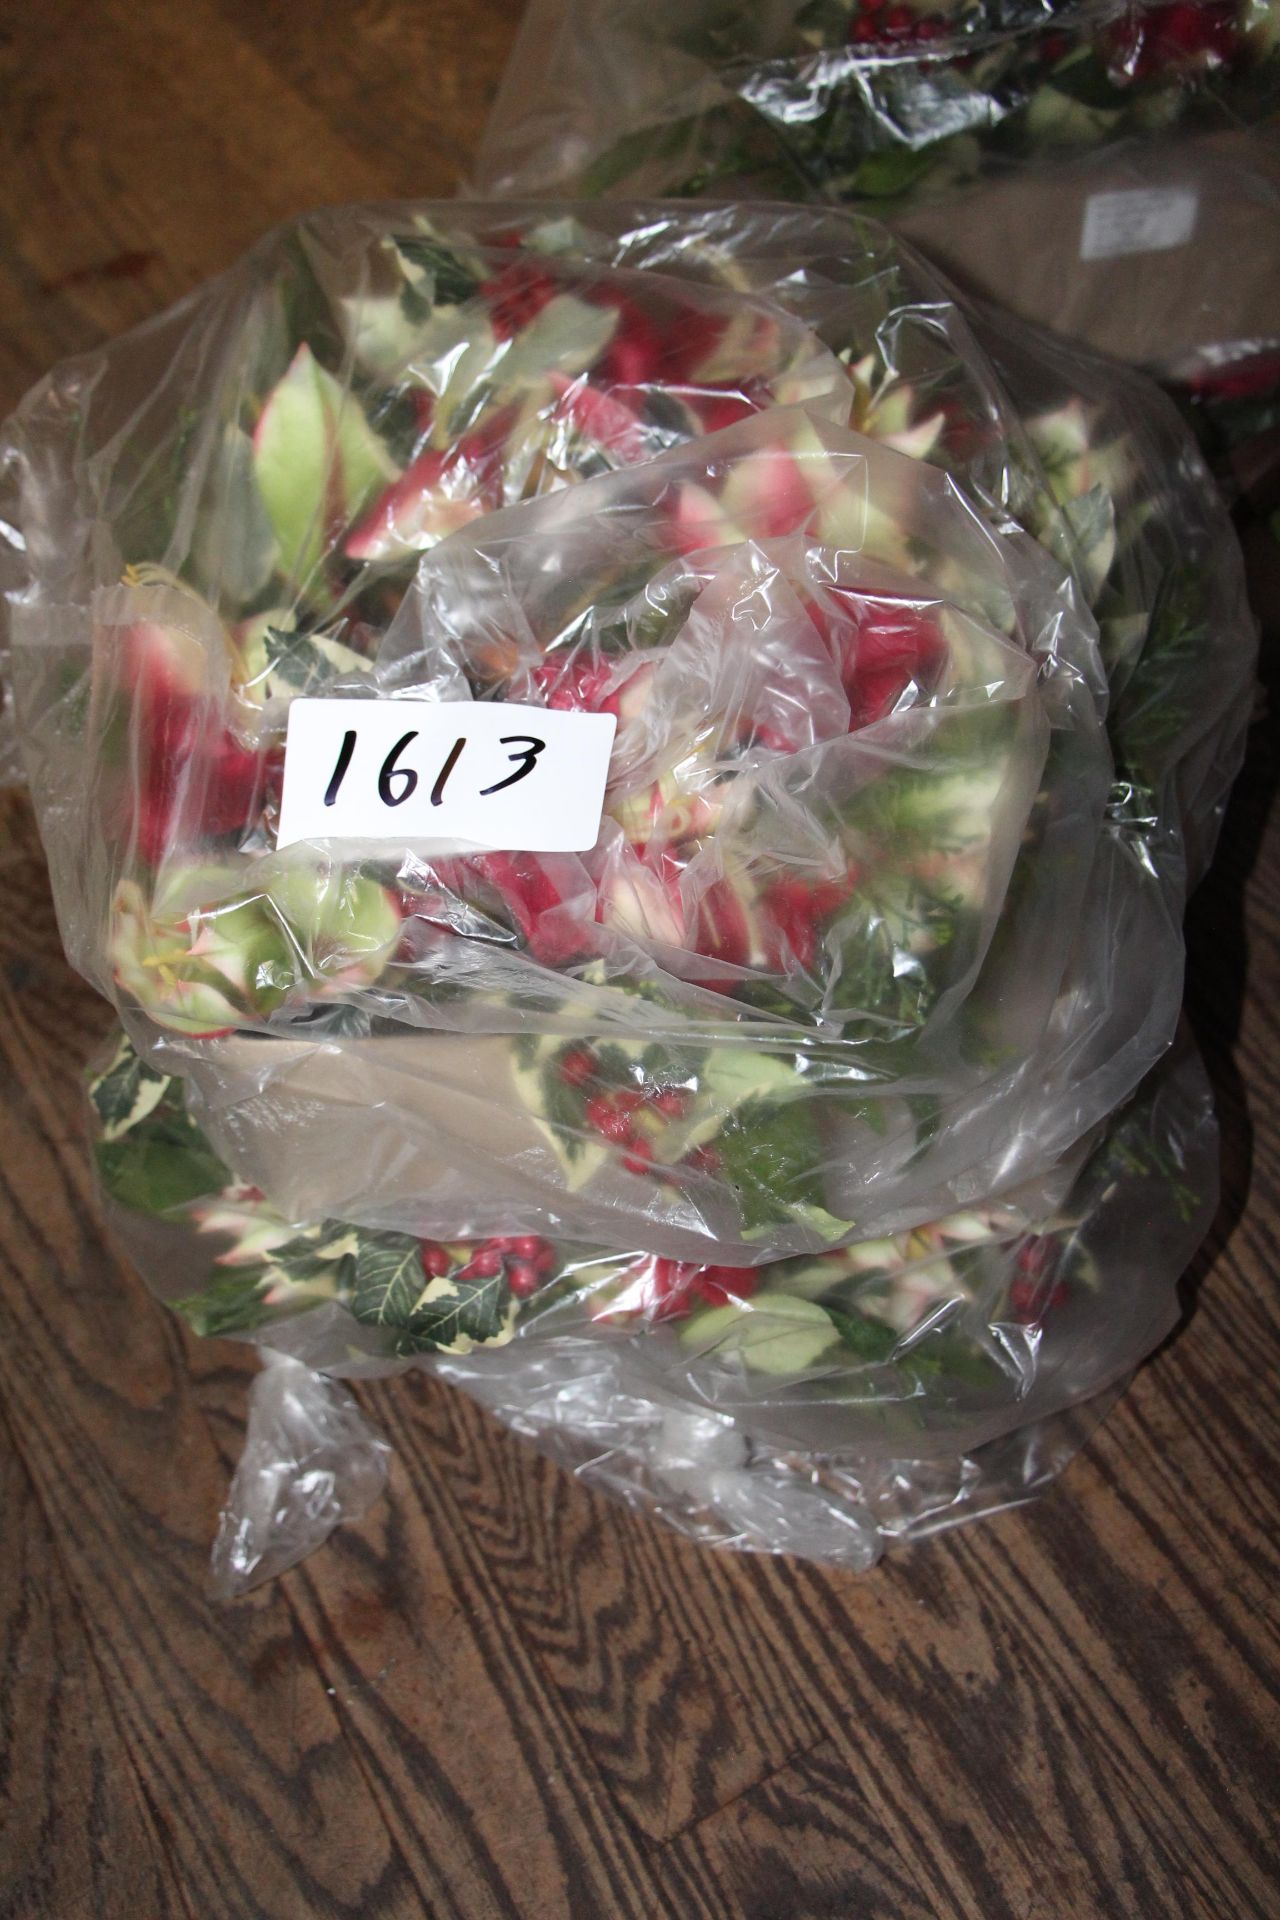 Box of 2 faux flower arrangements on glass bowl (in bag)